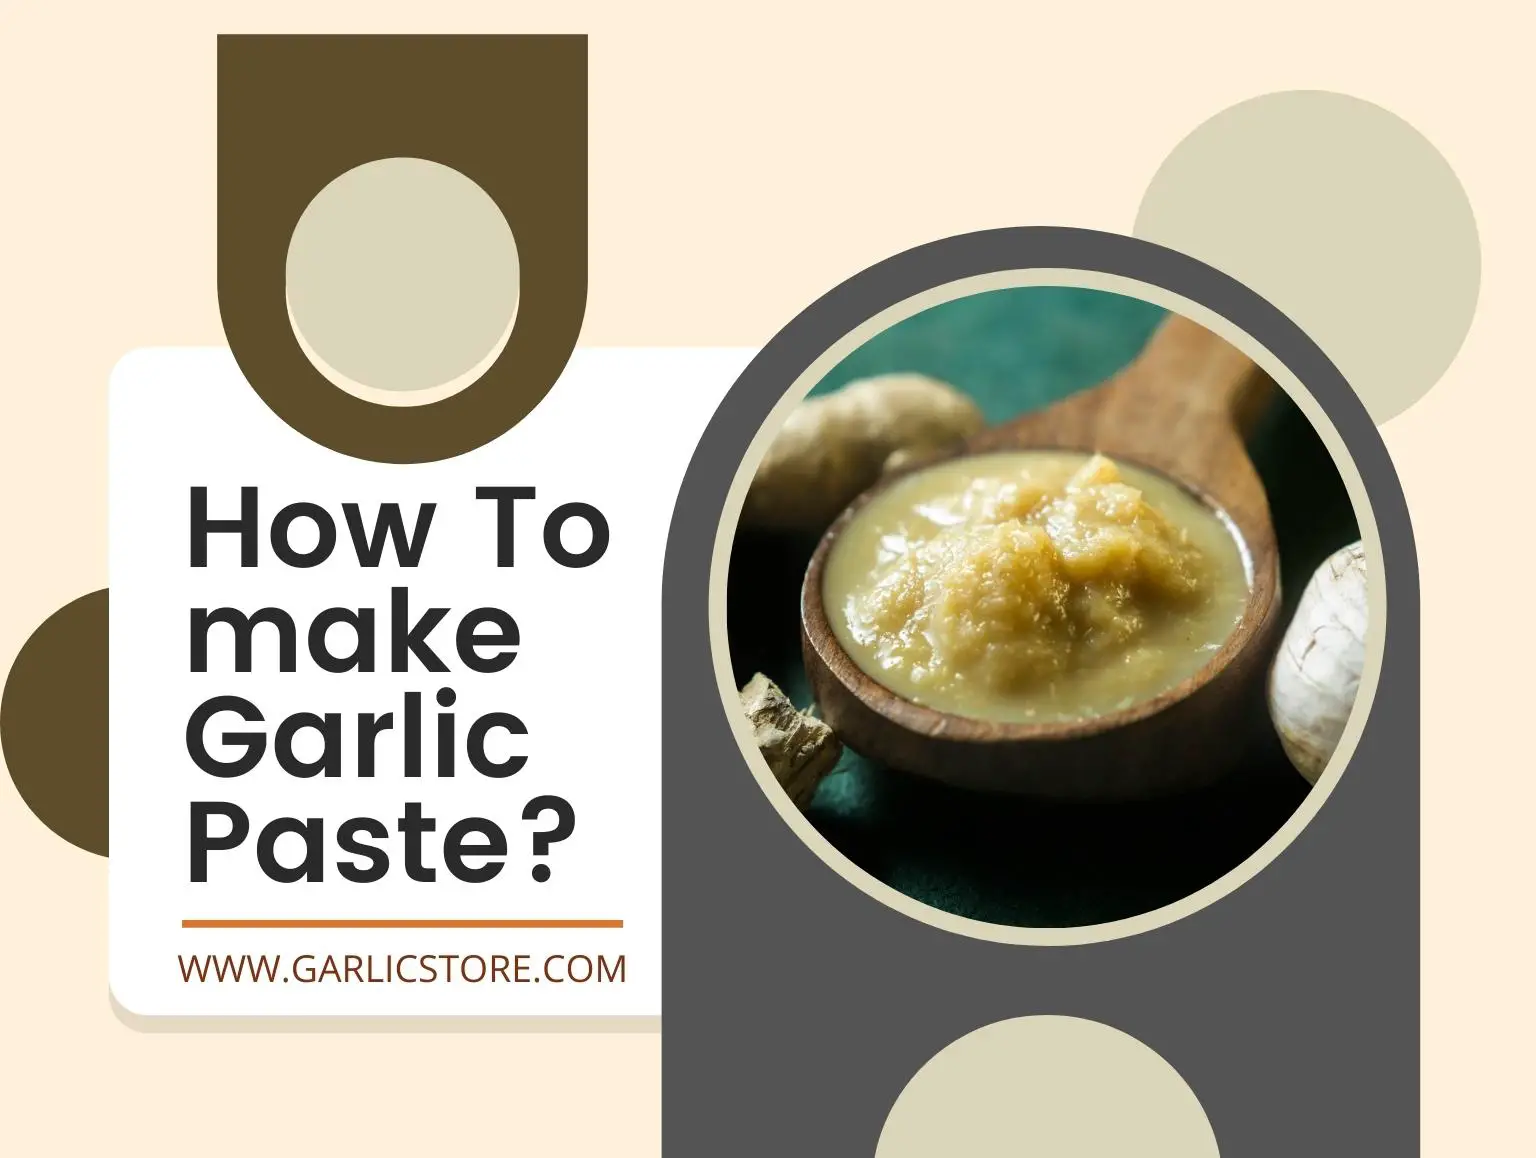 How-To-Make-Garlic-Paste-feature